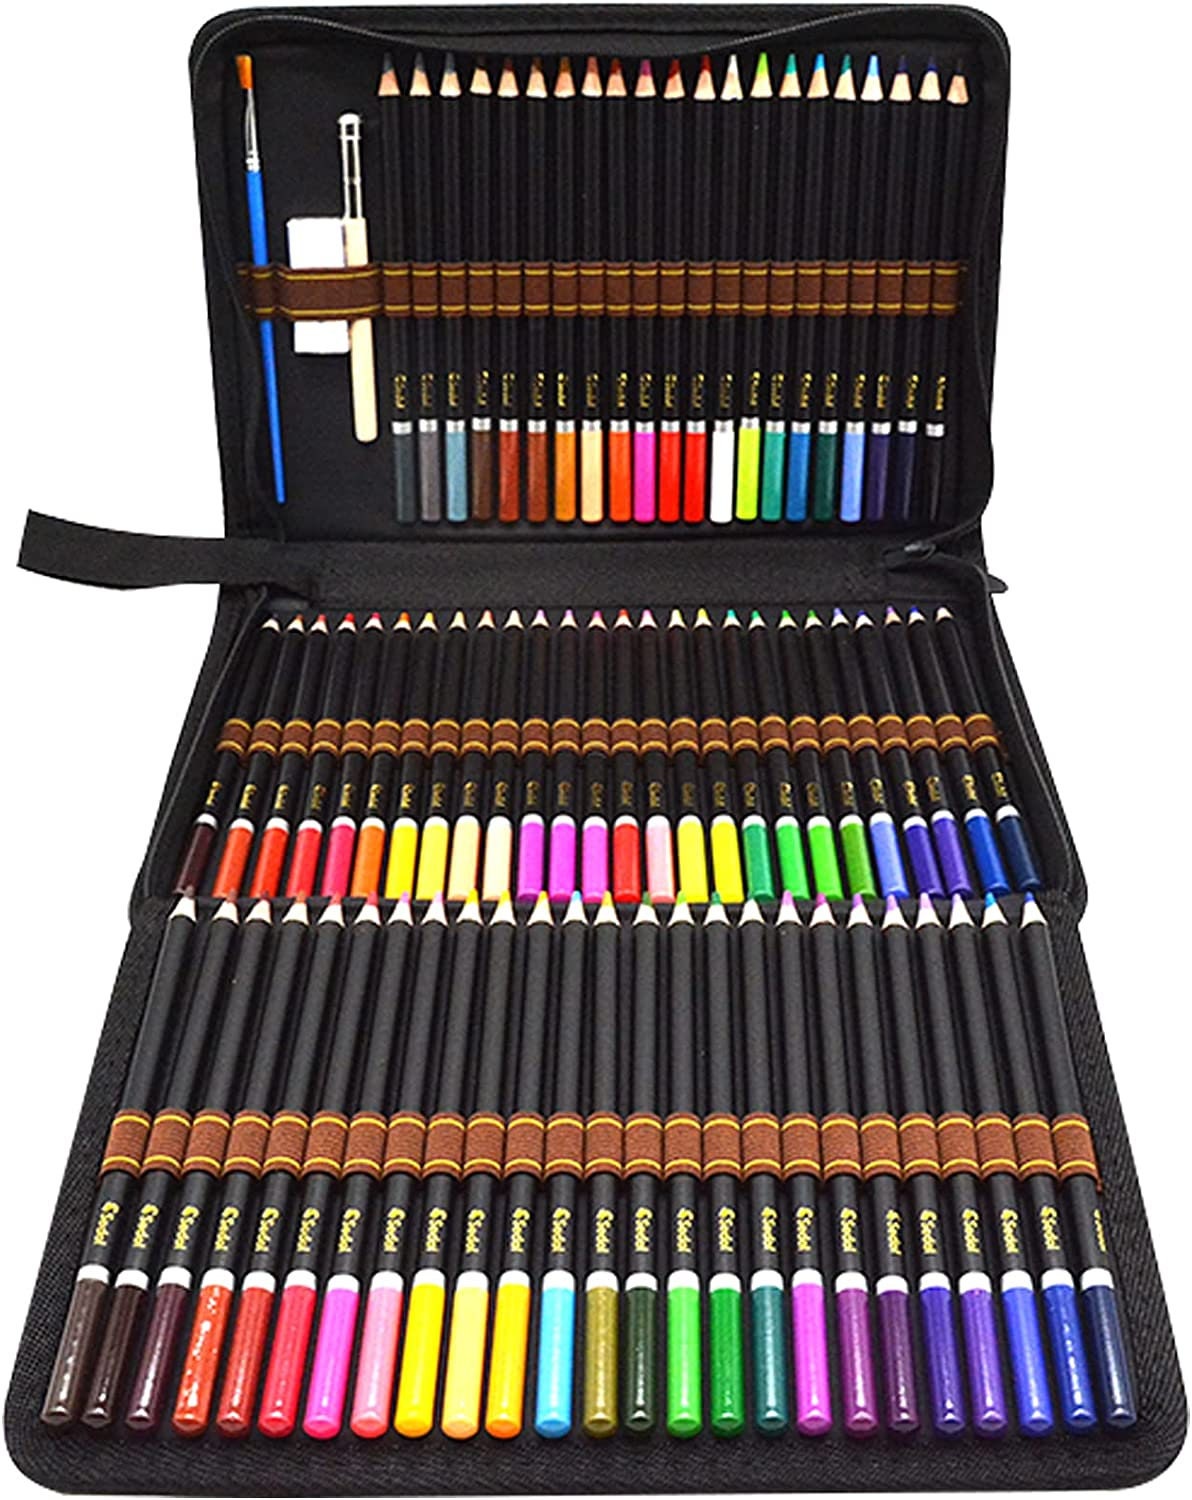 15 Jumbo Coloring Pencils With Color Names, Coloring Pencil, Back